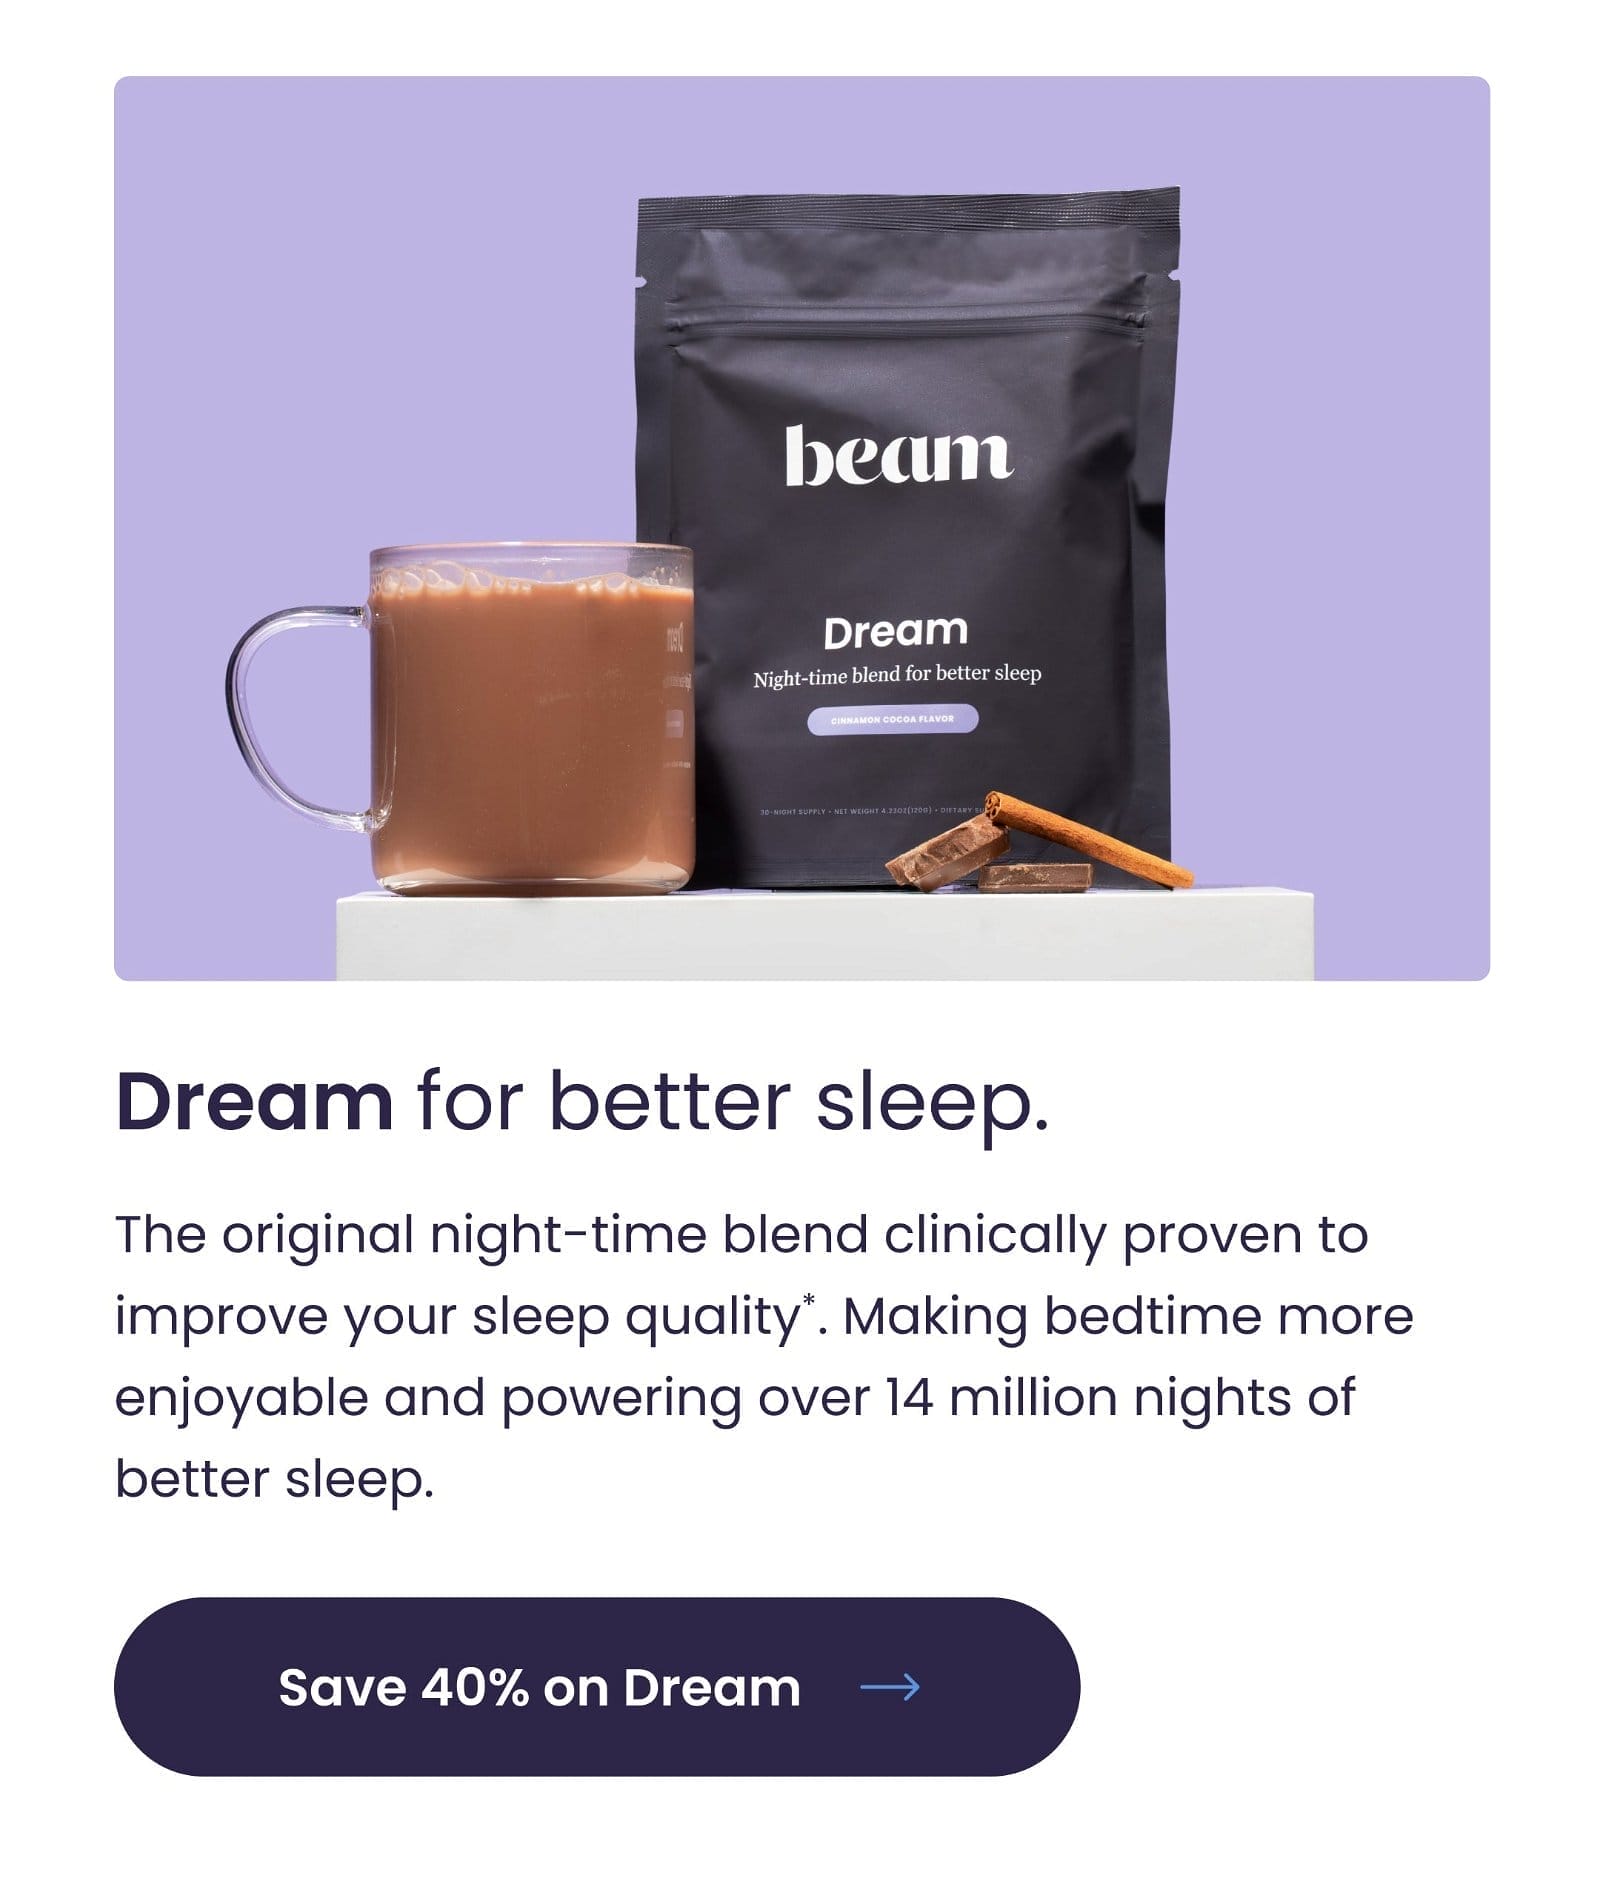 The original night-time blend clinically proven to improve your sleep quality*. Making bedtime more enjoyable and powering over 14 million nights of better sleep.